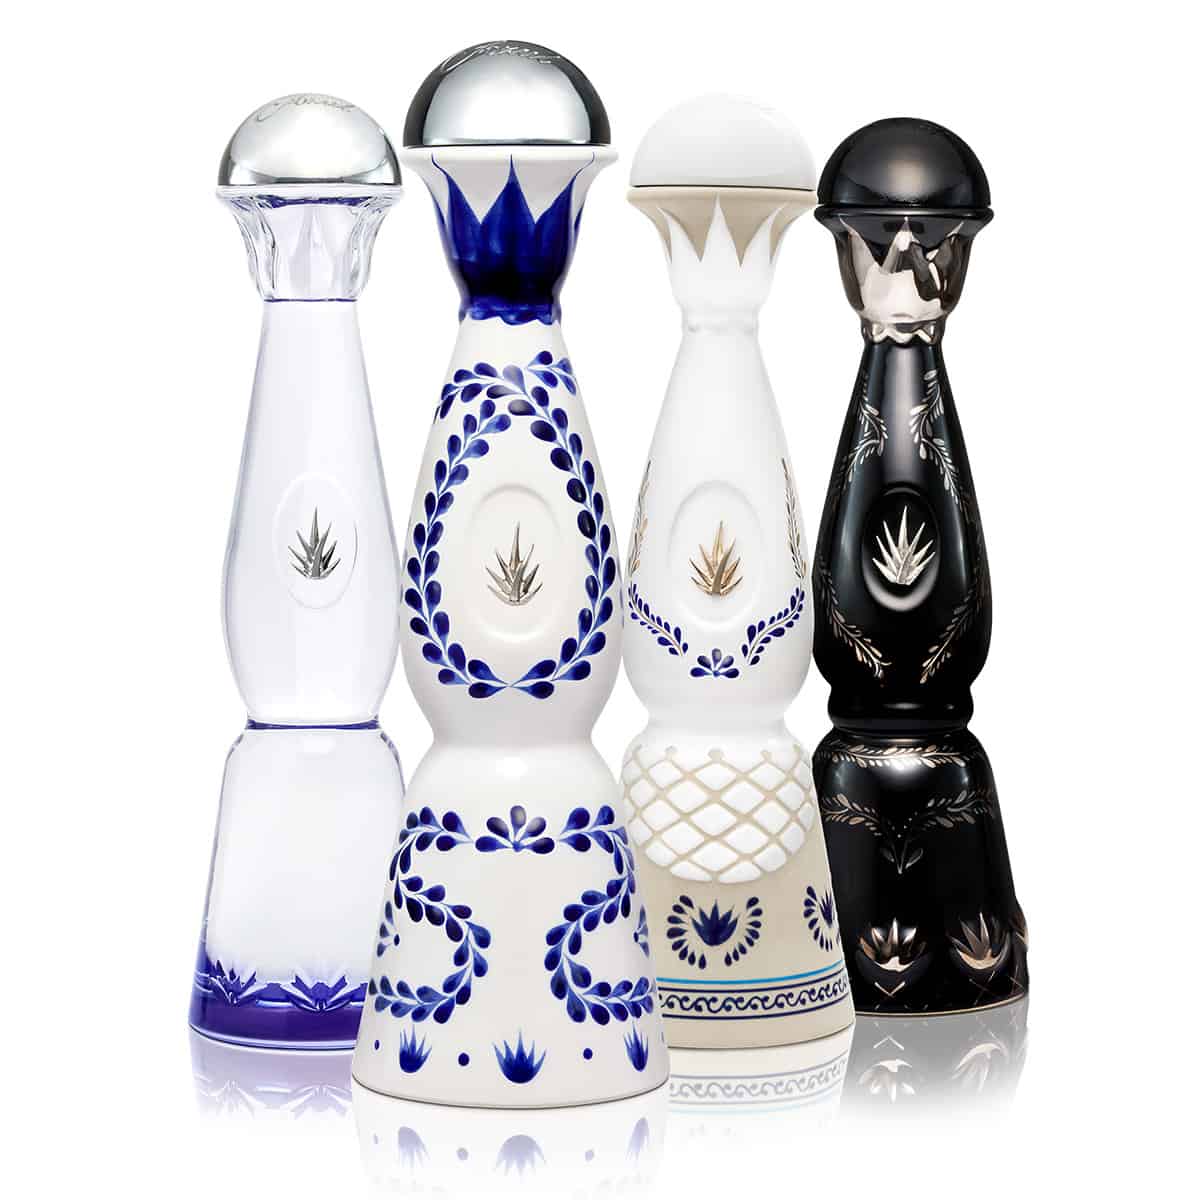 Clase Azul family of tequila. Clase Azul's 15th anniversary edition bottle is considered one of the most expensive tequilas in the world at $30,000.